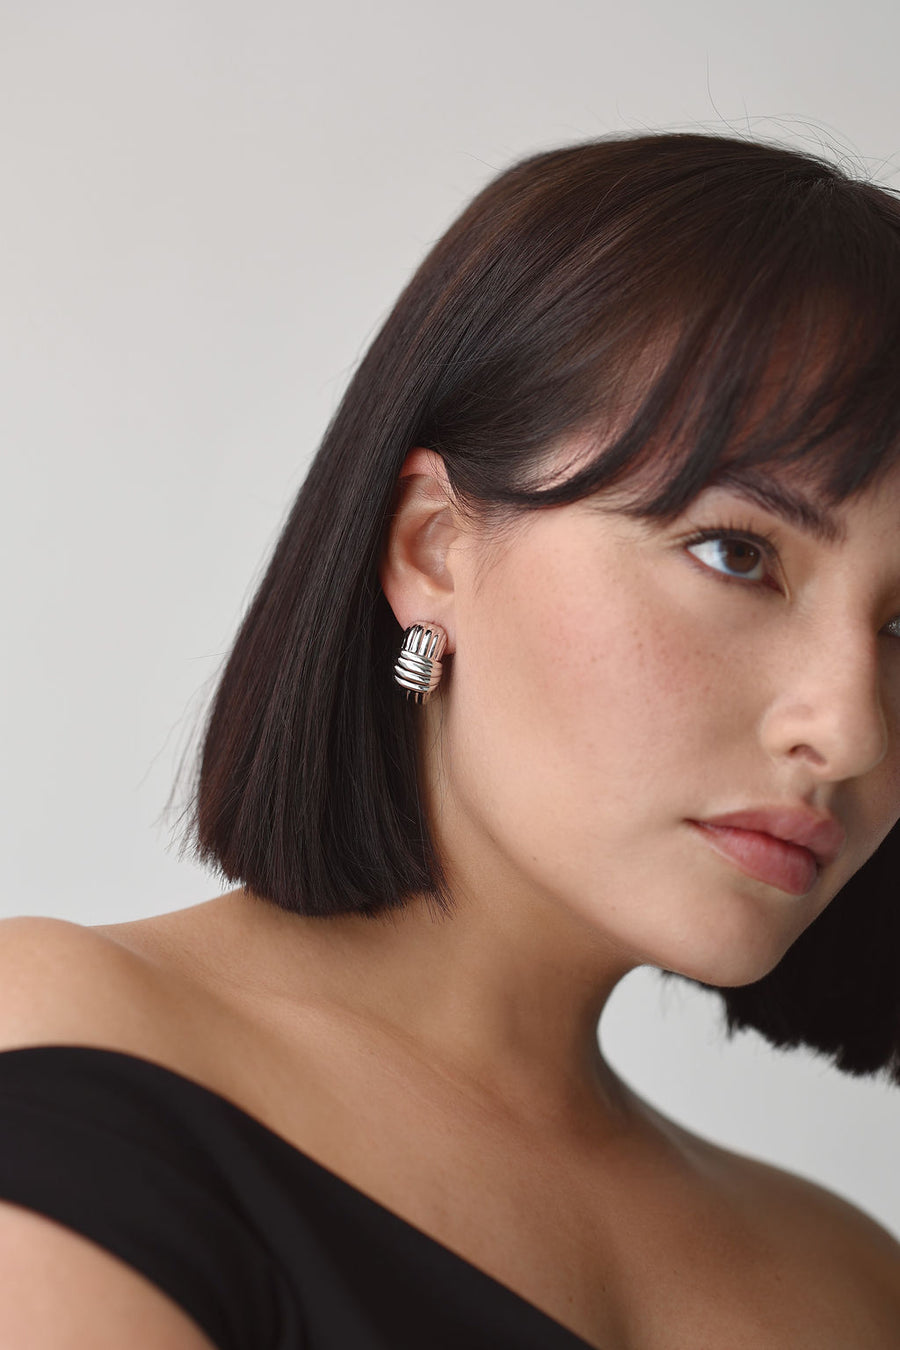 Woman staring off into the distance, wearing a black off the shoulder top and chunky silver earrings